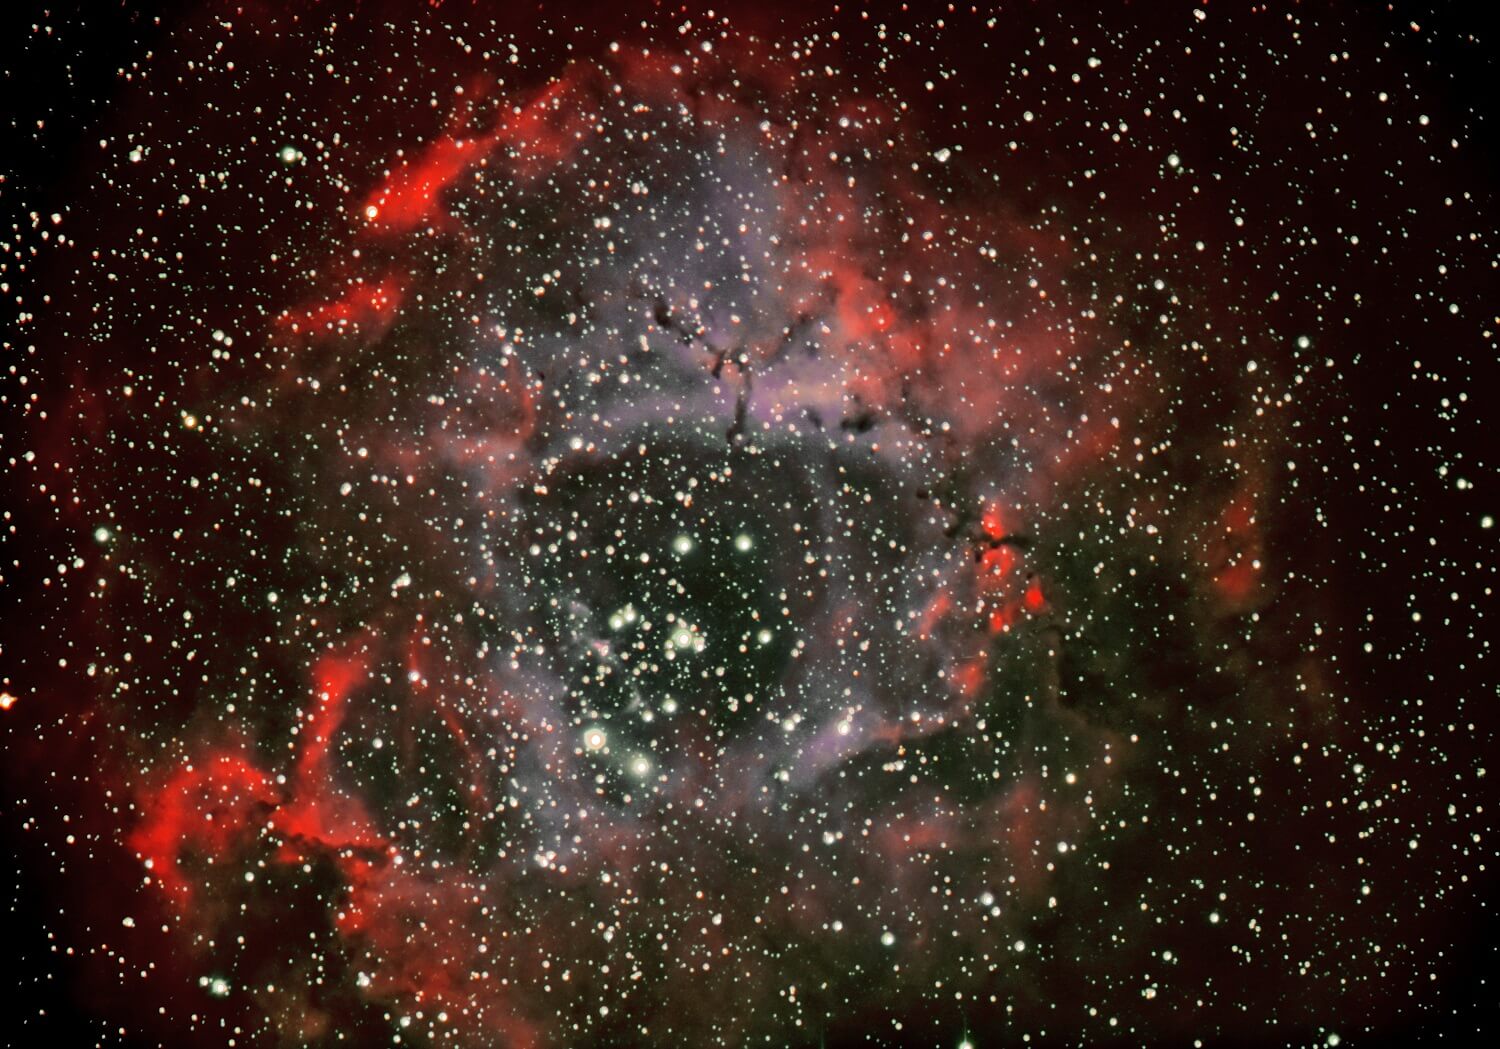 View of the far-off rosette nebula photographed in the Hotel Rangá Observatory in south Iceland.